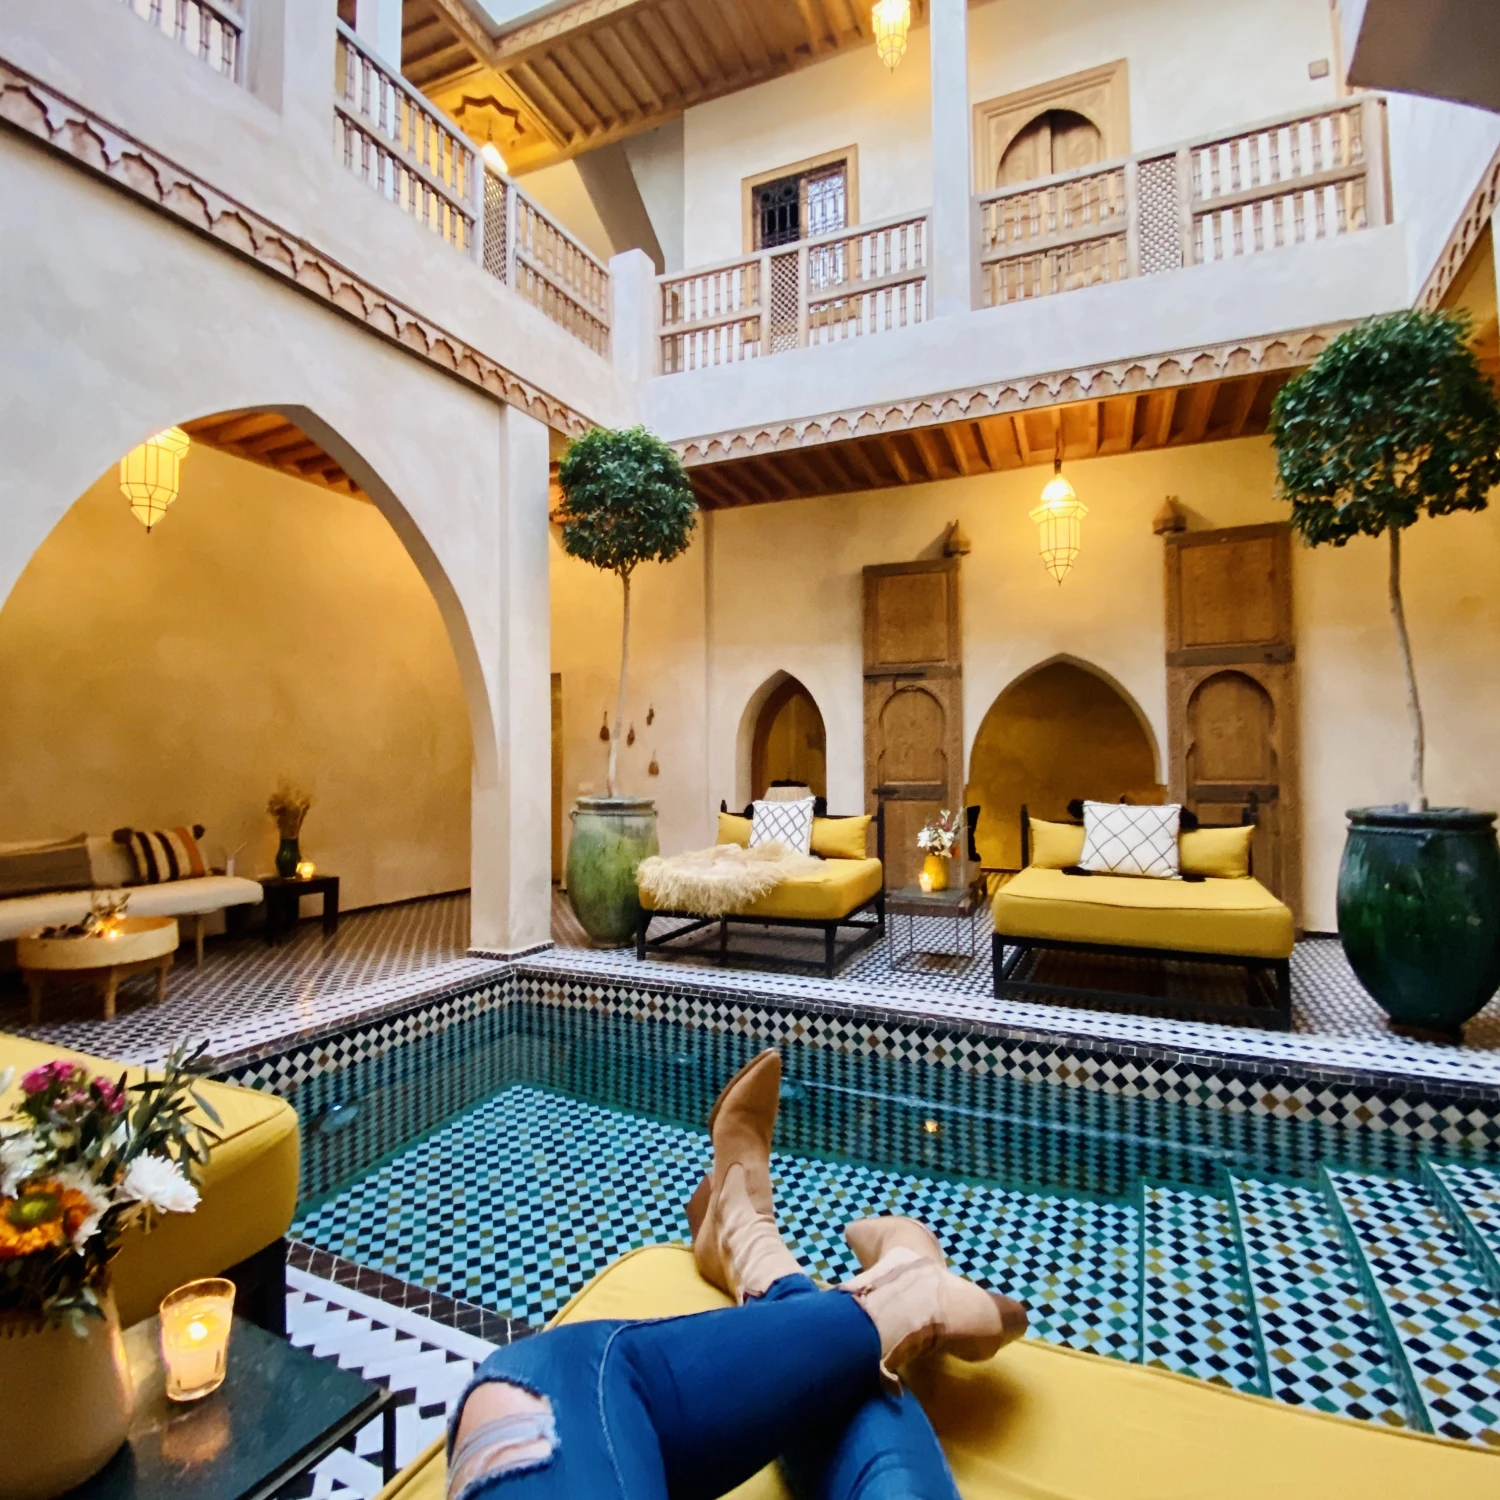 A person chilling in front of an indoor tiled pool.